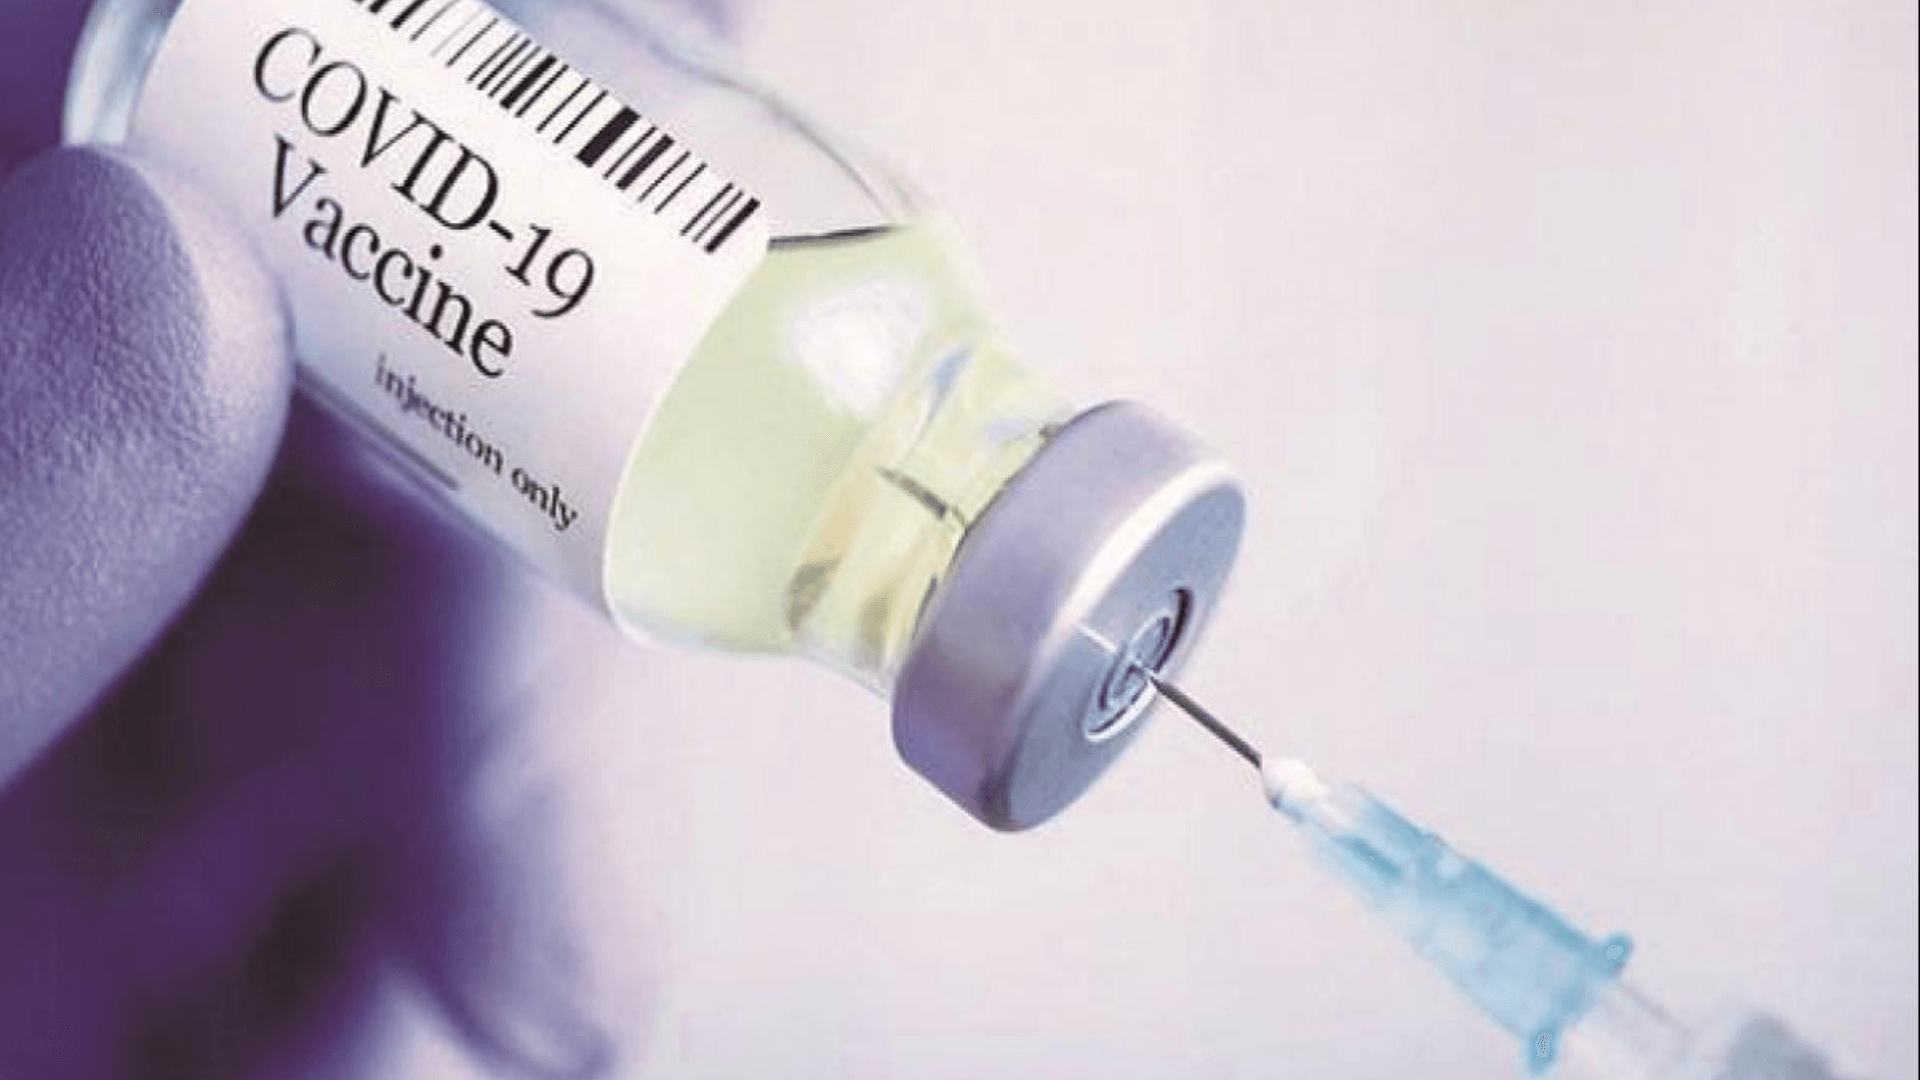 92-Of-The-Federal-Workers-Got-The-First-Dose-Of-Covid-19-Vaccine-1